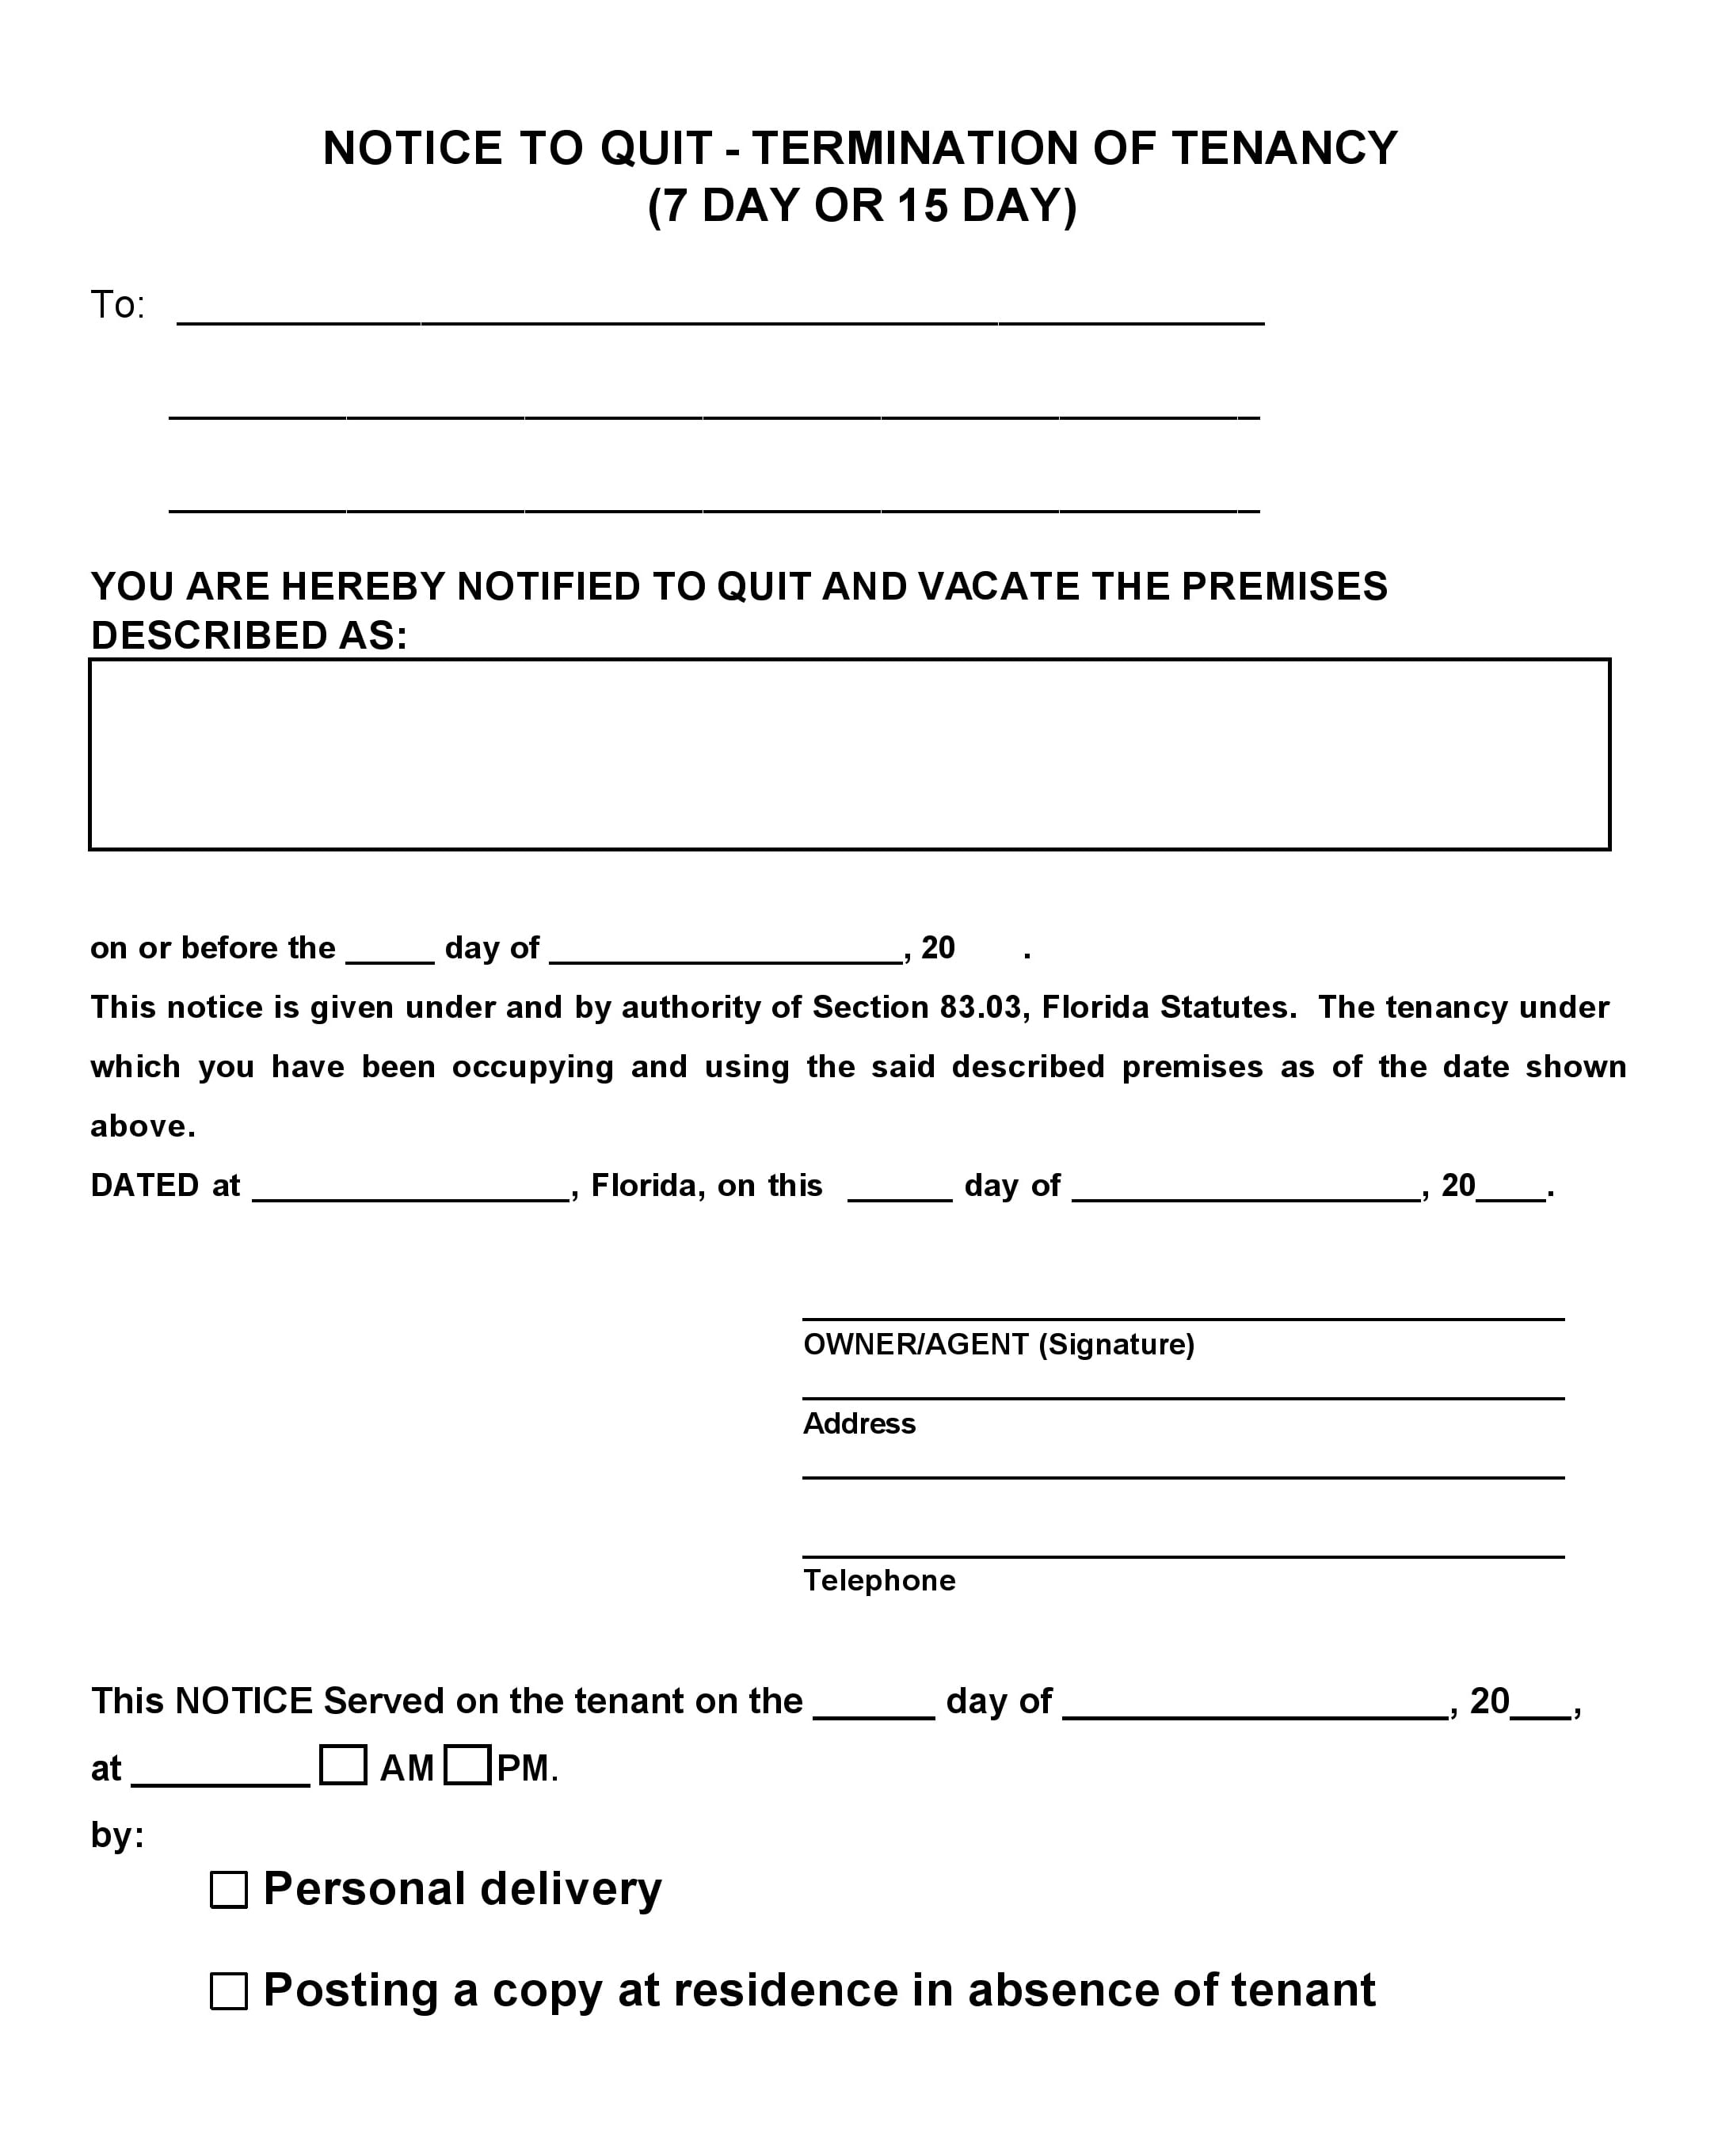 Free Florida Notice To Quit Termination Of Tenancy 7 Day Or 15 Day Pdf Template Form Download